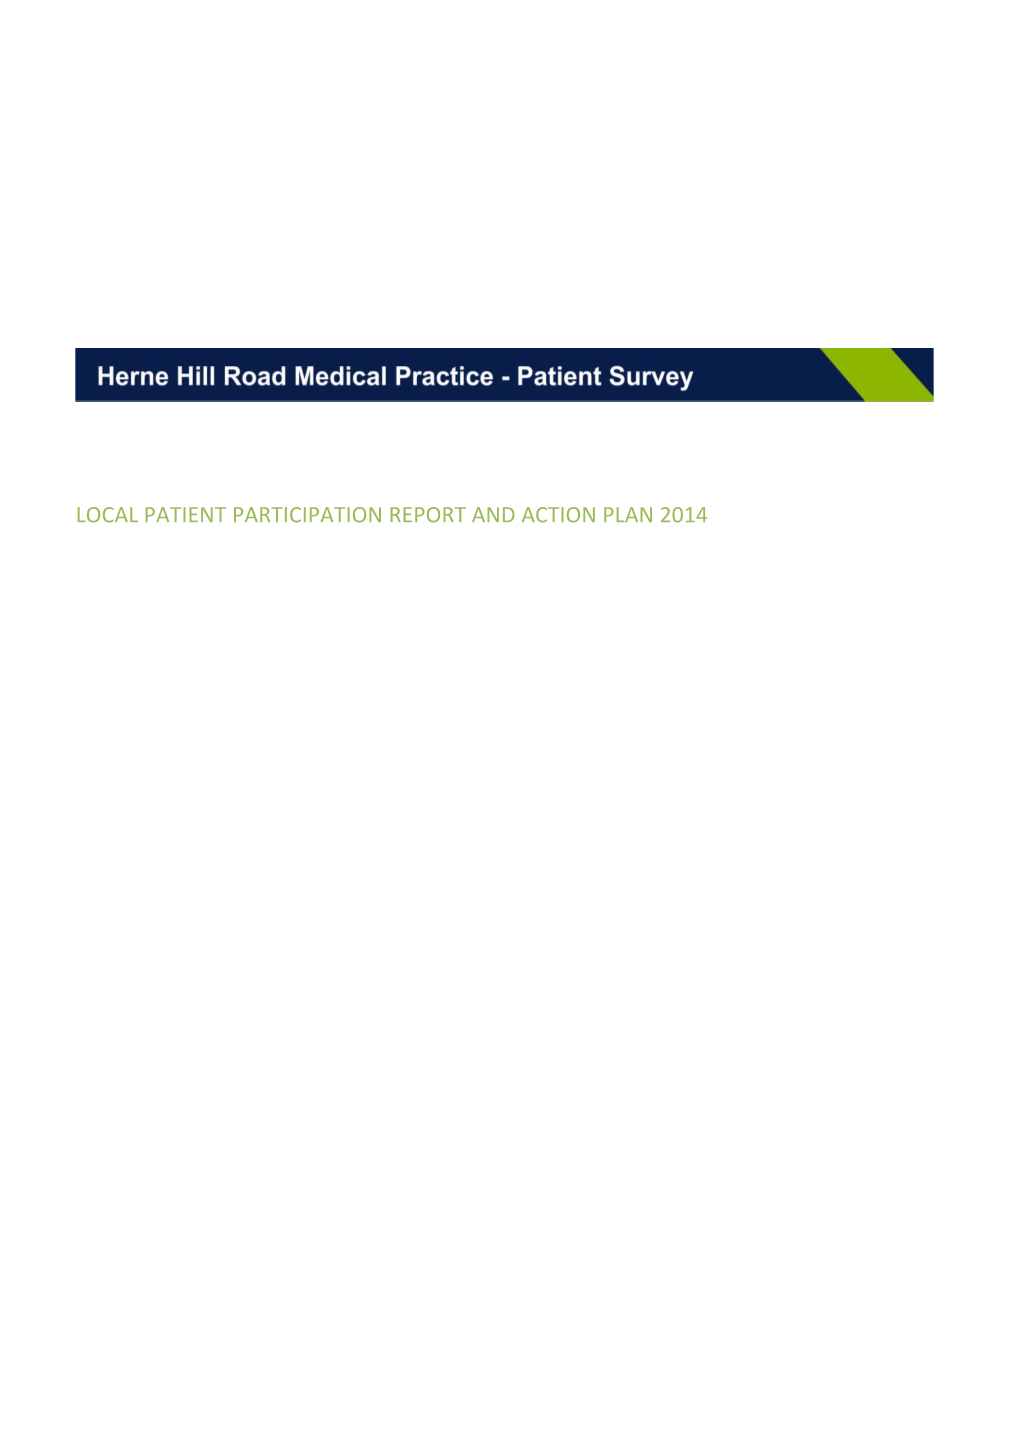 Local Patient Participation Report and Action Plan 2014